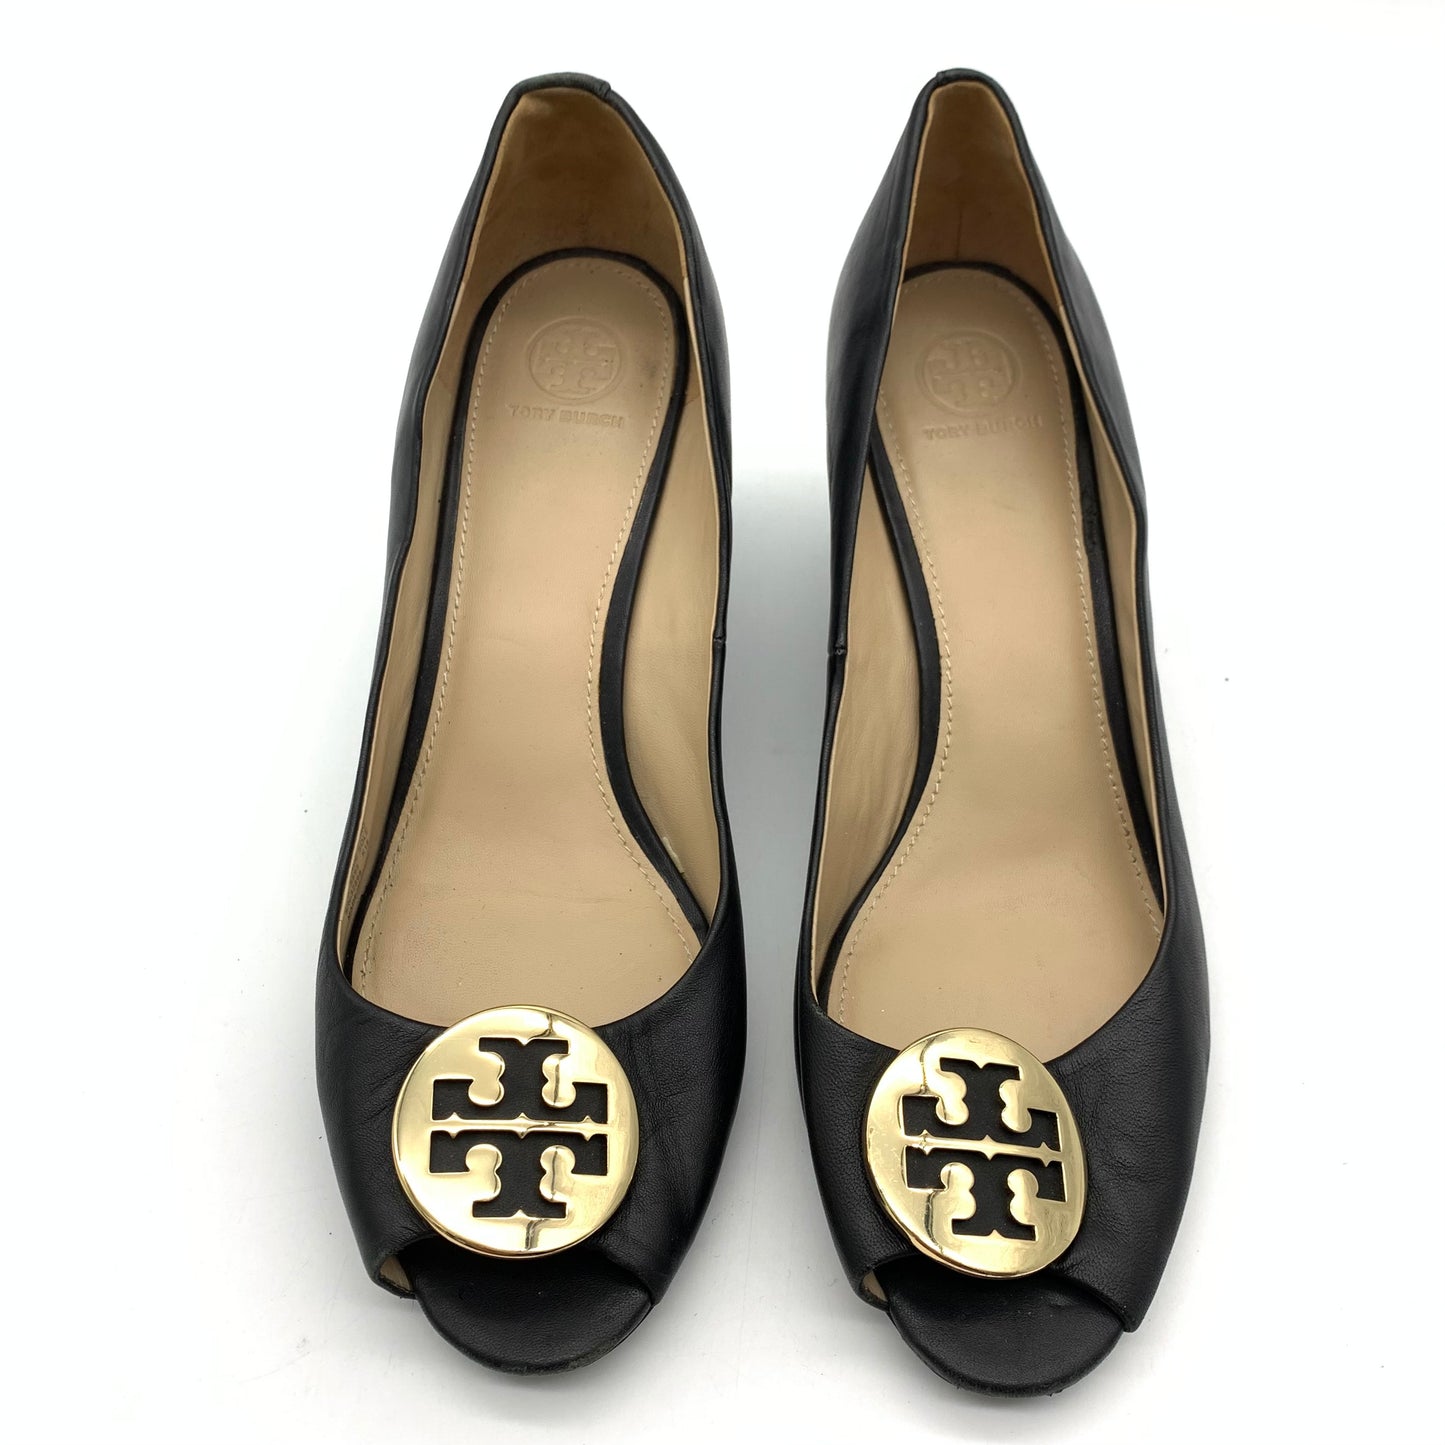 Sandals Heels Wedge By Tory Burch  Size: 11